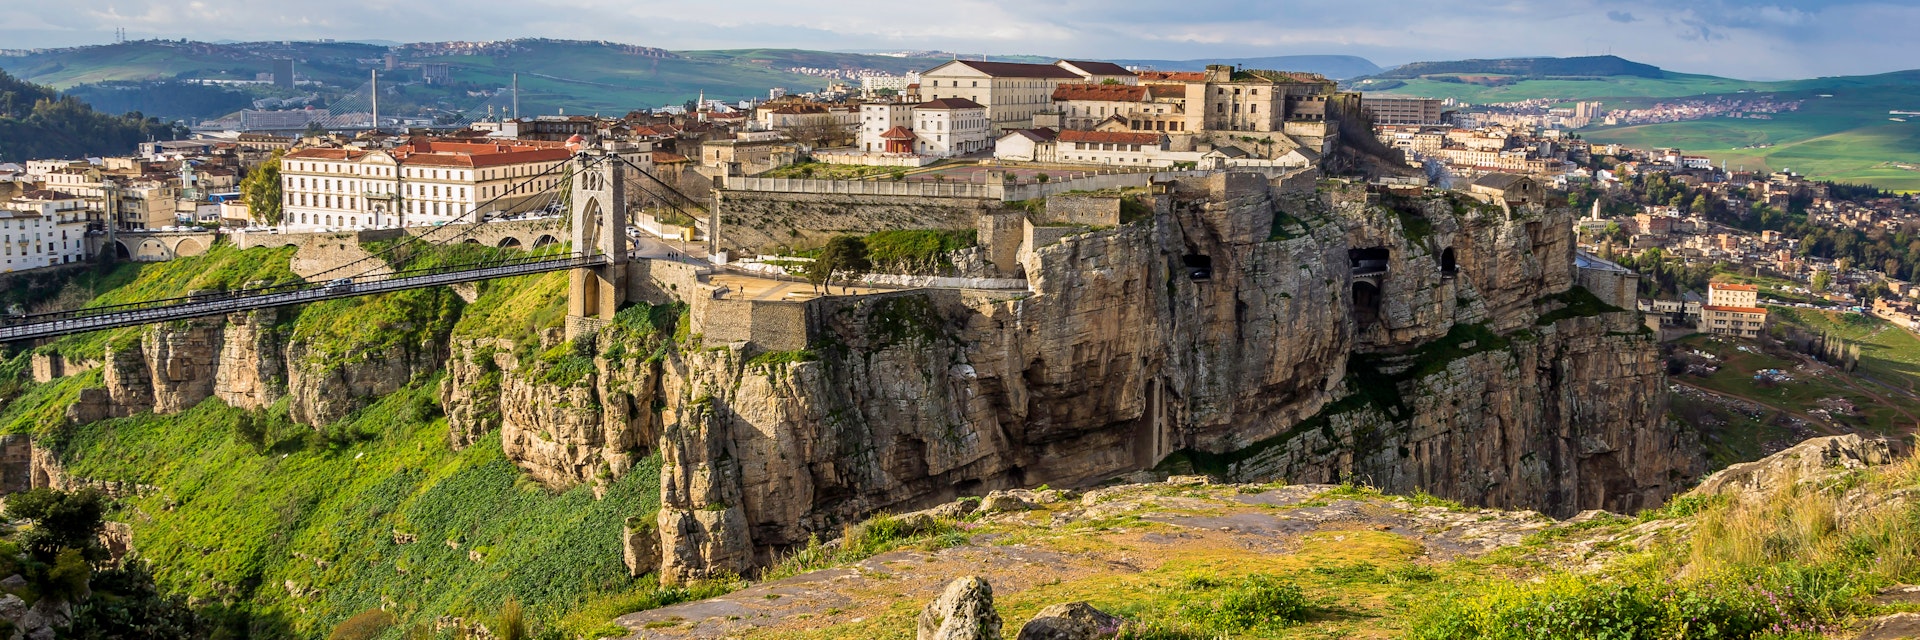 Constantine in Algeria is the capital of Constantine Province in northeastern Algeria - Constantine has numerous picturesque bridges connecting hills and valleys surrounding the city ; Shutterstock ID 1374108002; full: digital; gl: 65050; netsuite: poi; your: Barbara Di Castro
1374108002